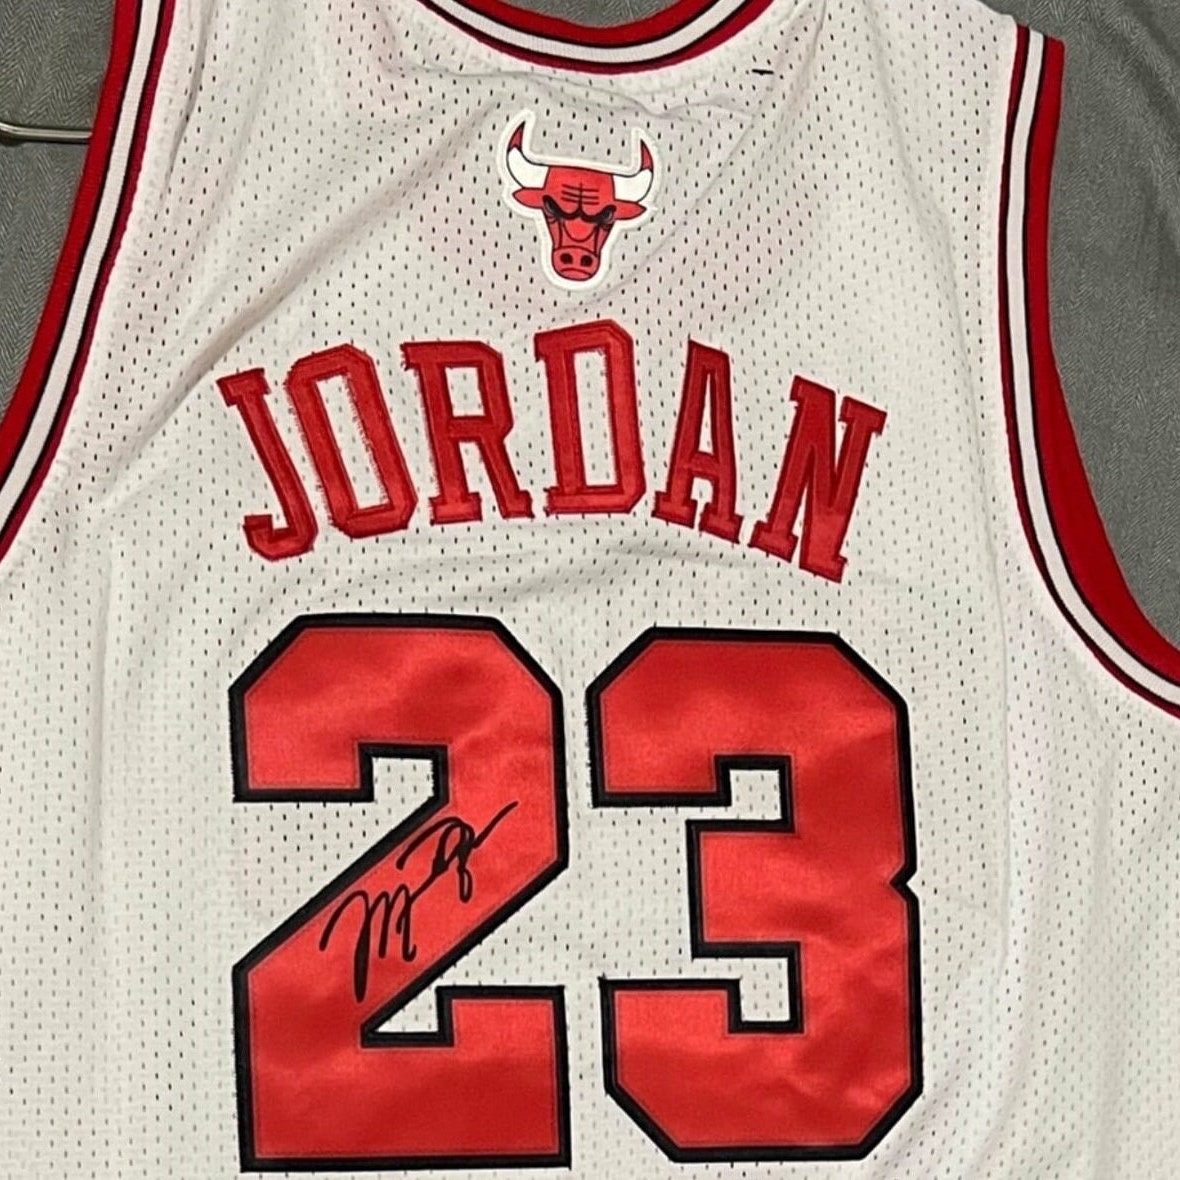 Wholesale wholesale Cheap Chicago Basketball Jersey Dress Embroidery  Stitched polyester Women's Bulls #23Jordan Basketball Uniform Design From  m.